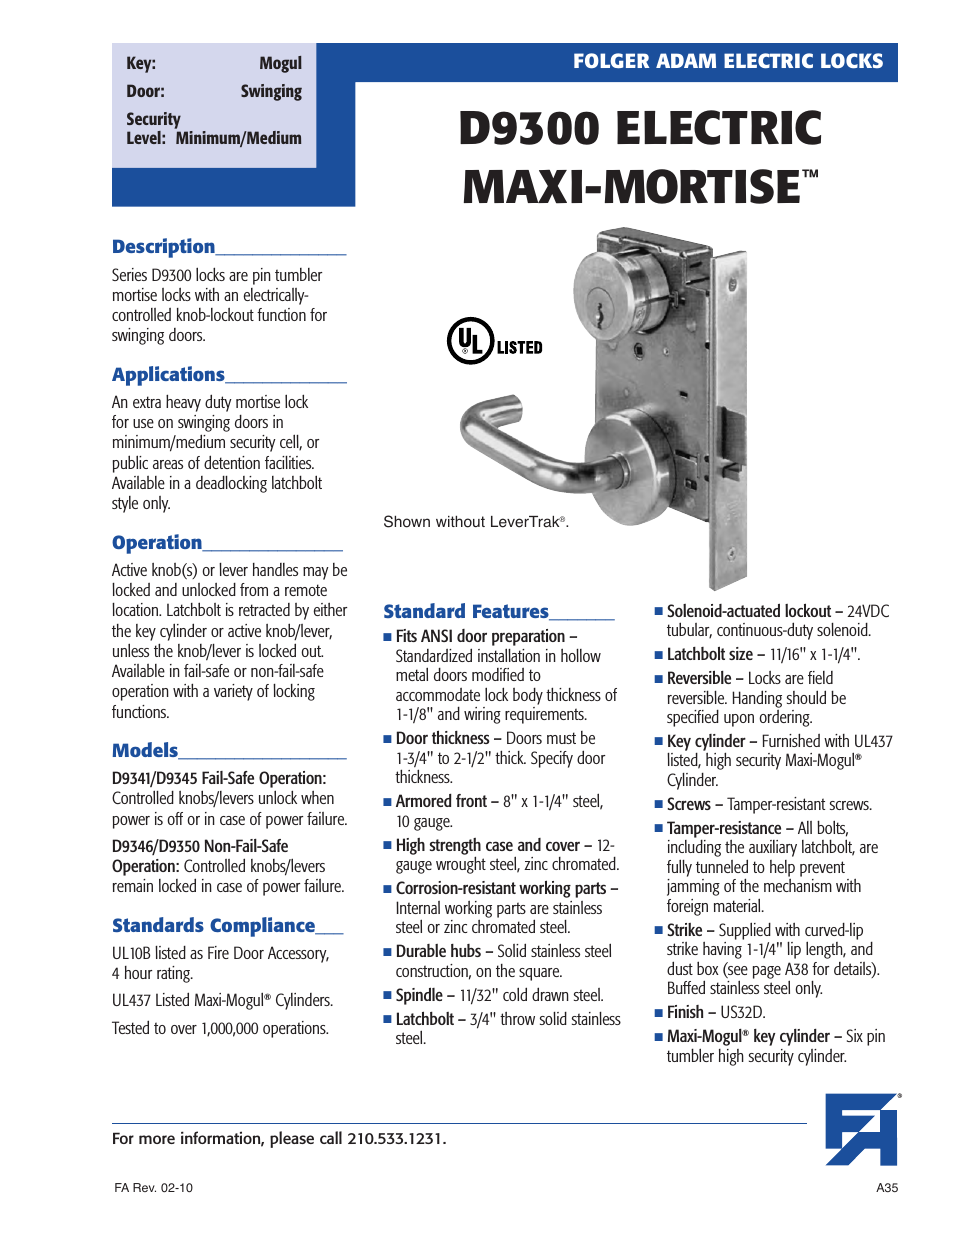 D9300 ELECTRIC MAXI-MORTISE